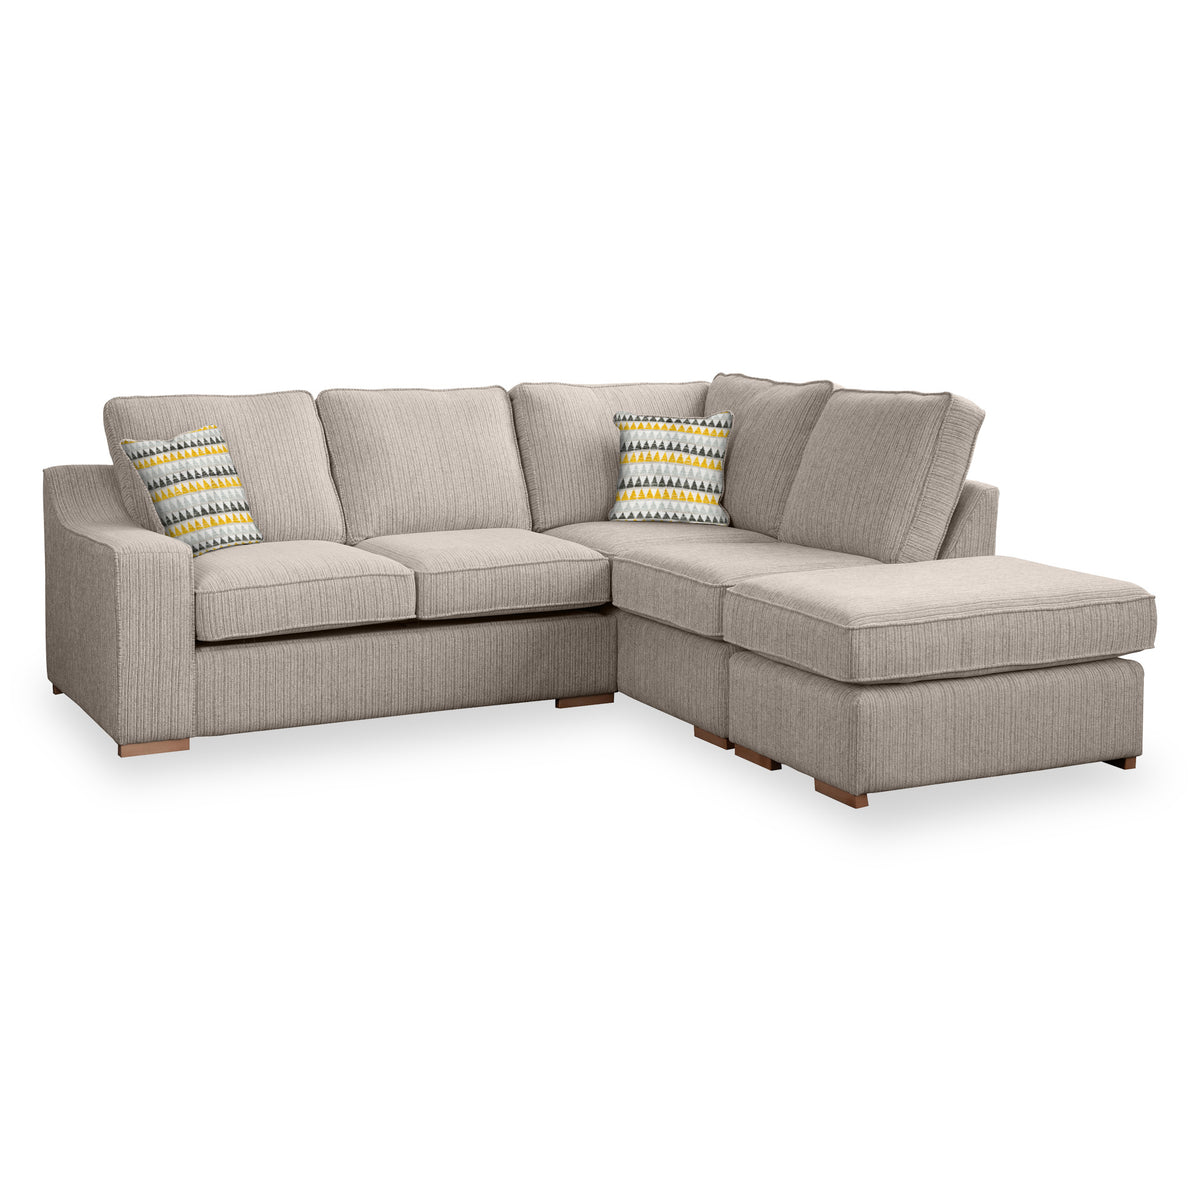 Ashow Beige Right Hand Corner Sofabed with Maika Mustard Scatter Cushions from Roseland furniture